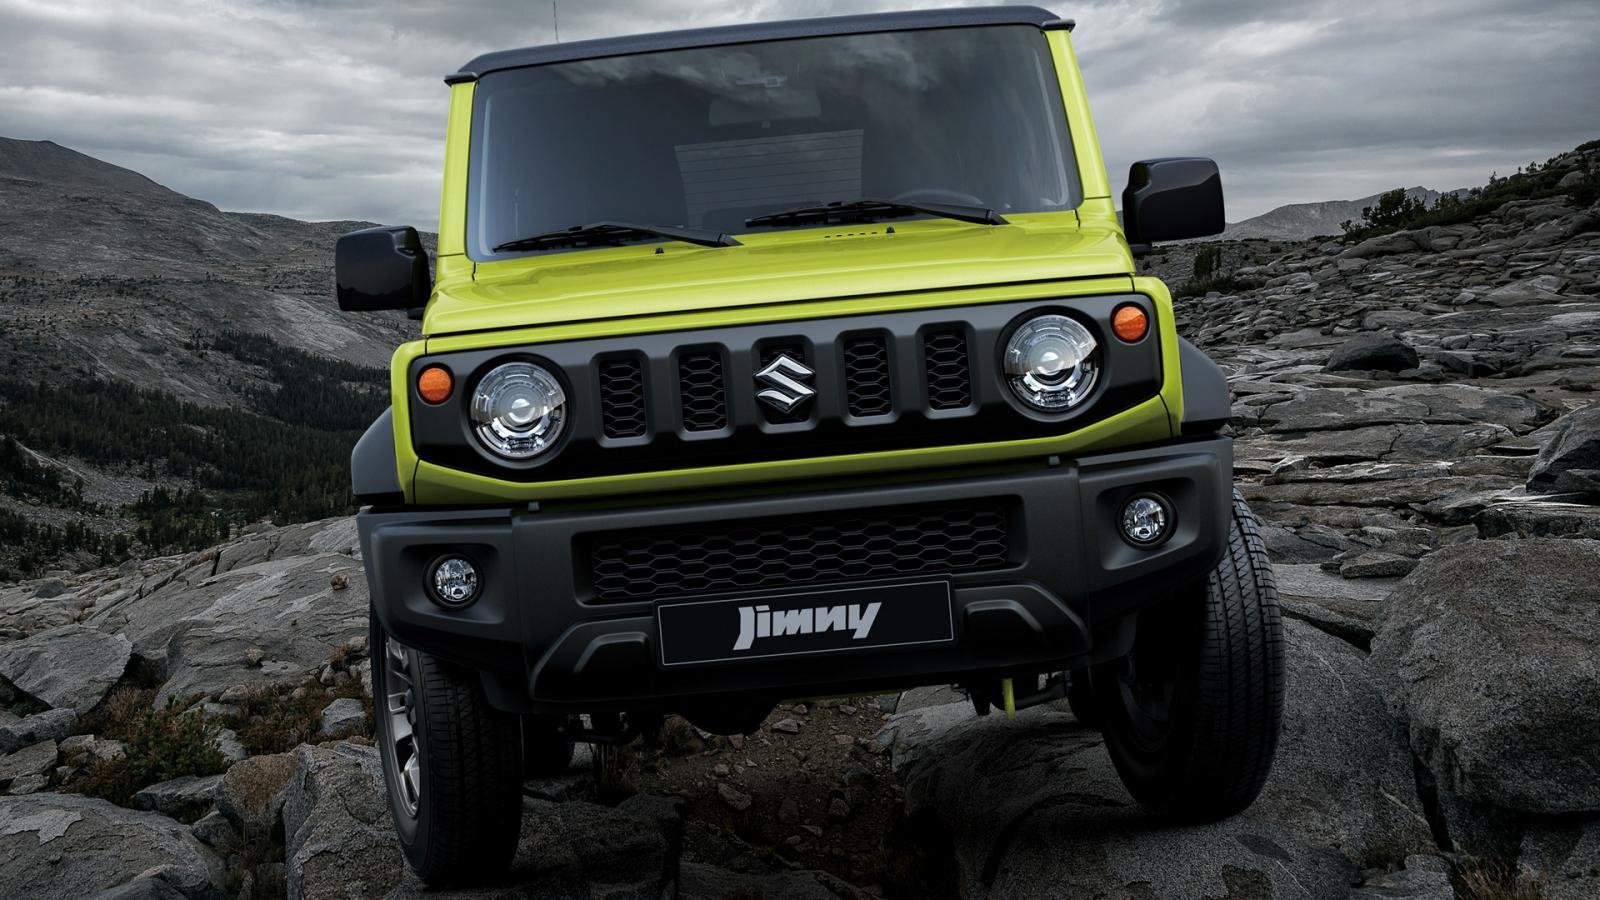 Suzuki Jimny To Be Discontinued in UK Next Year While India Awaits Its Local Launch